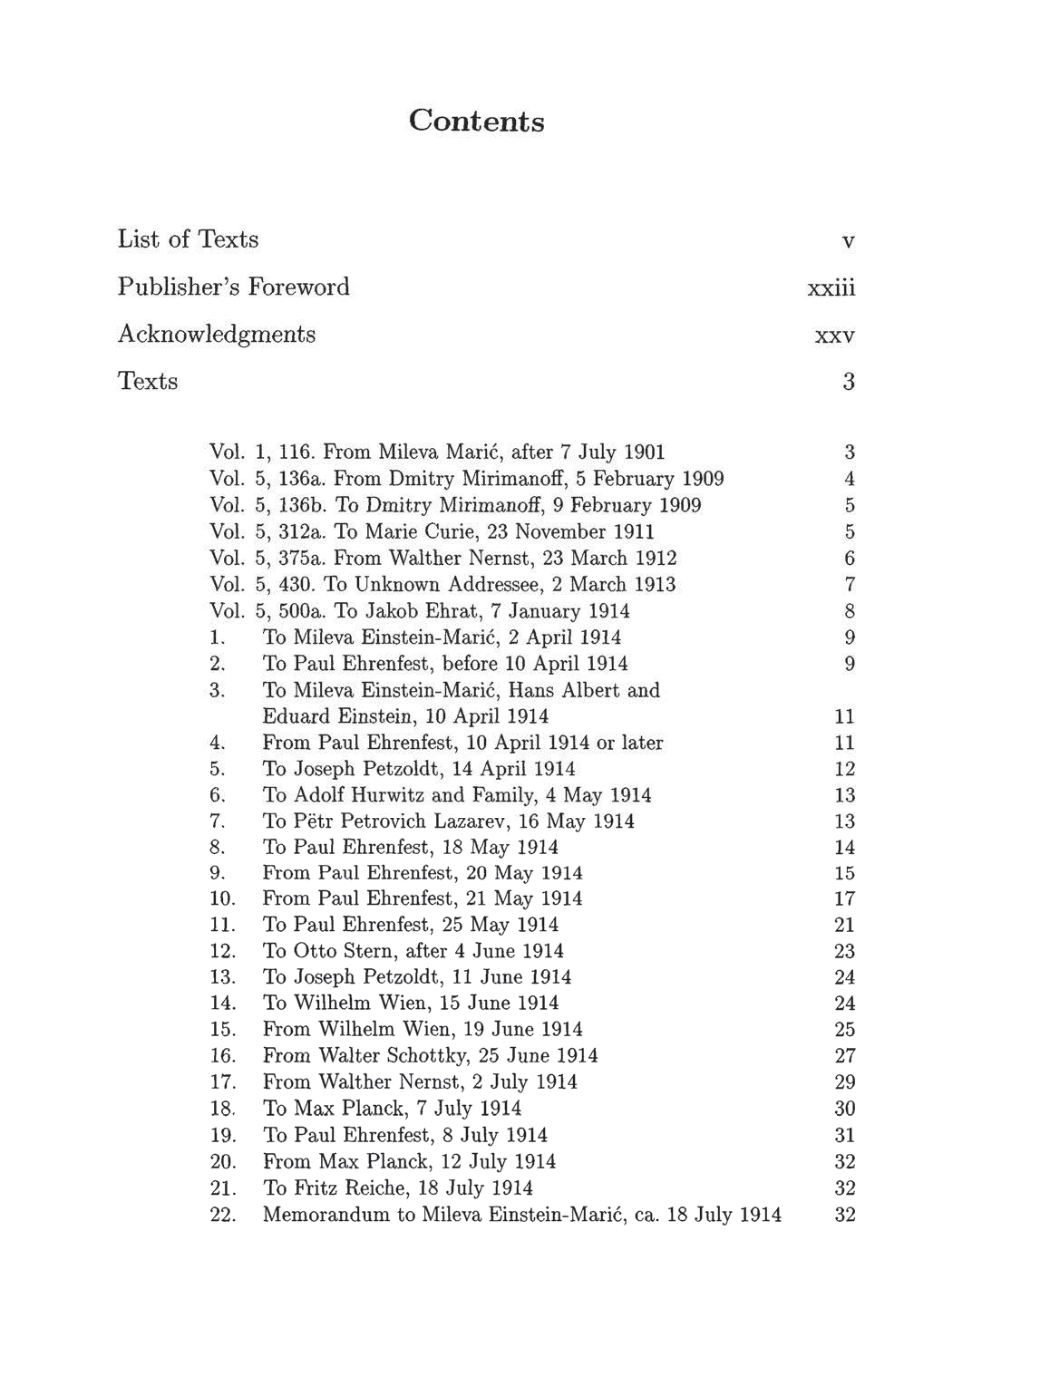 Volume 8: The Berlin Years: Correspondence, 1914-1918 (English translation supplement) page v